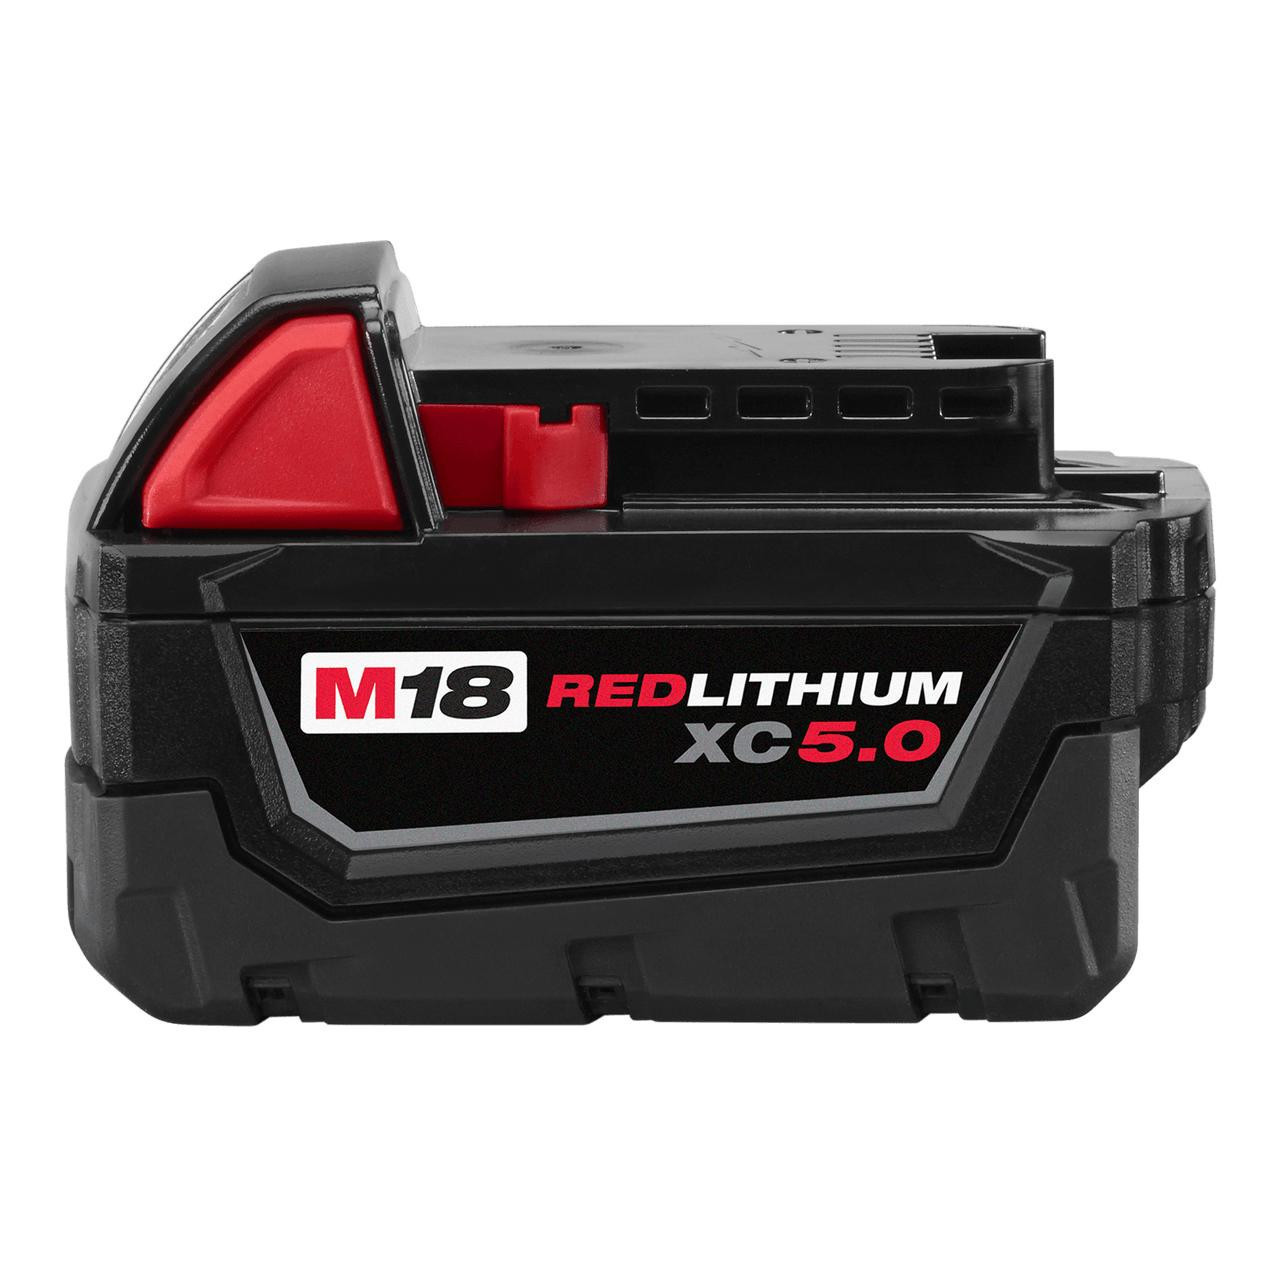 Milwaukee M12 & M18 Batteries: Two Batteries for All Your Jobs